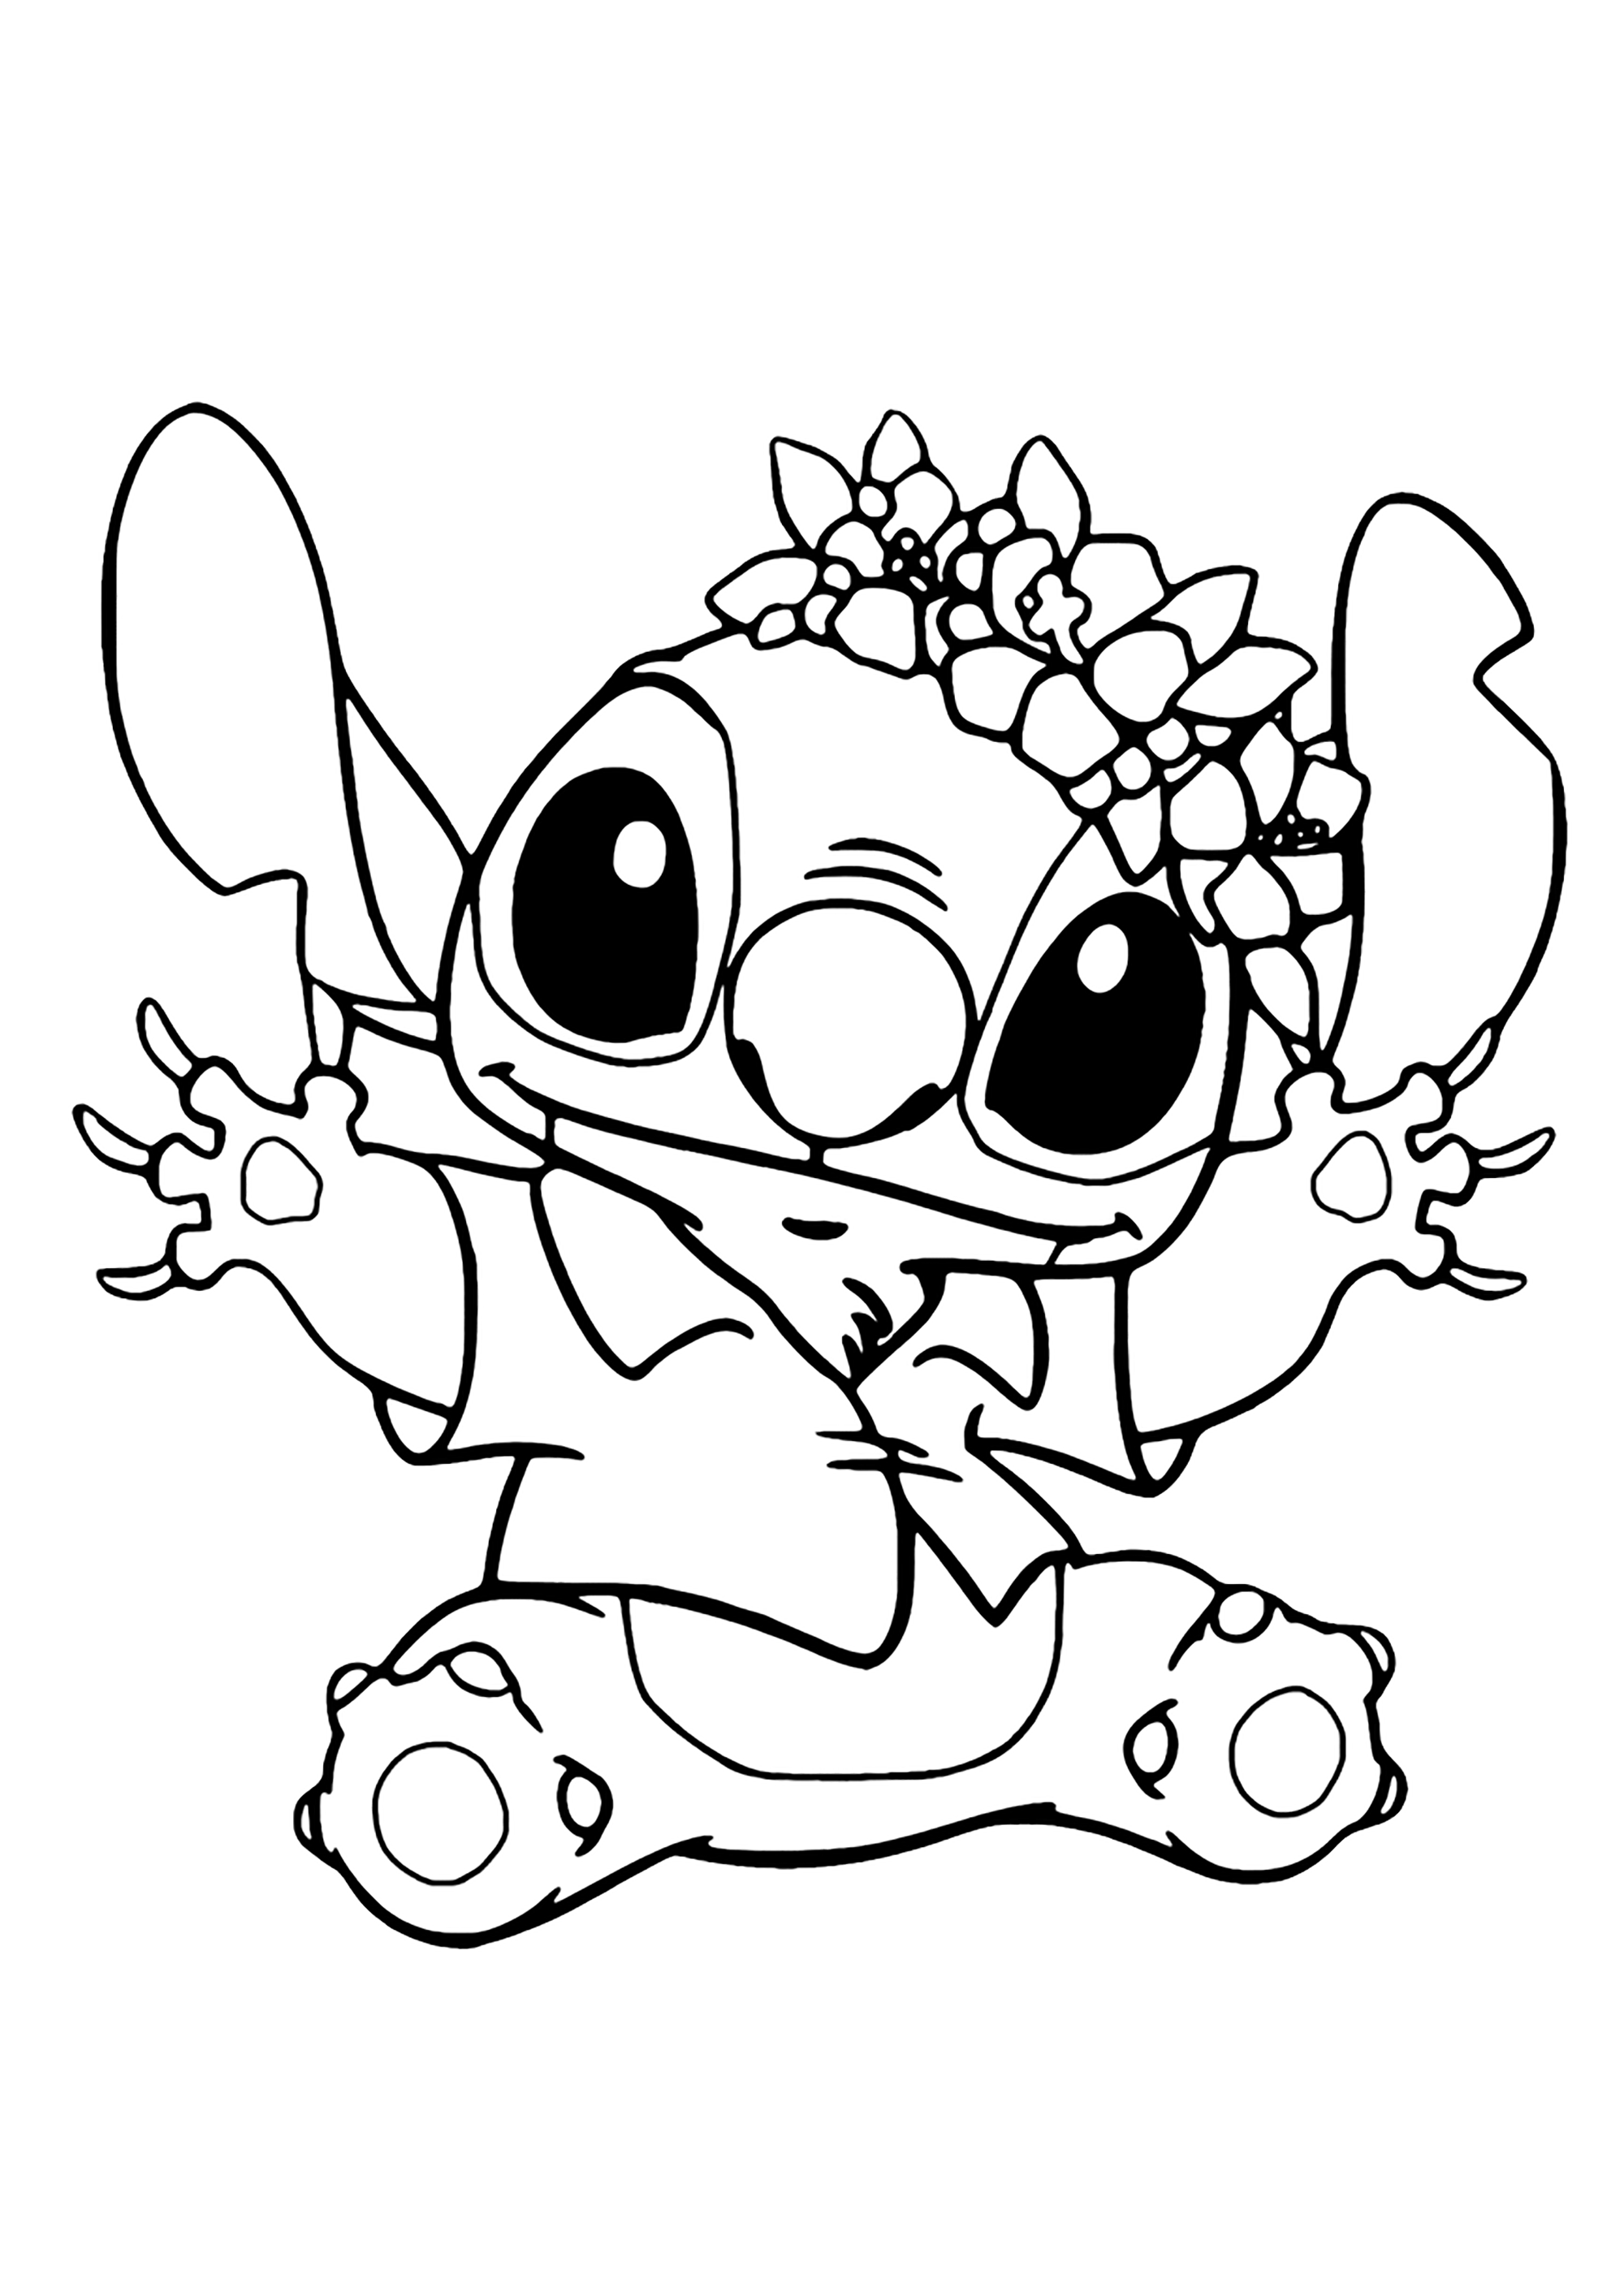 Lilo and stich coloring pages for children   Lilo And Stich Kids ... - Otakugadgets